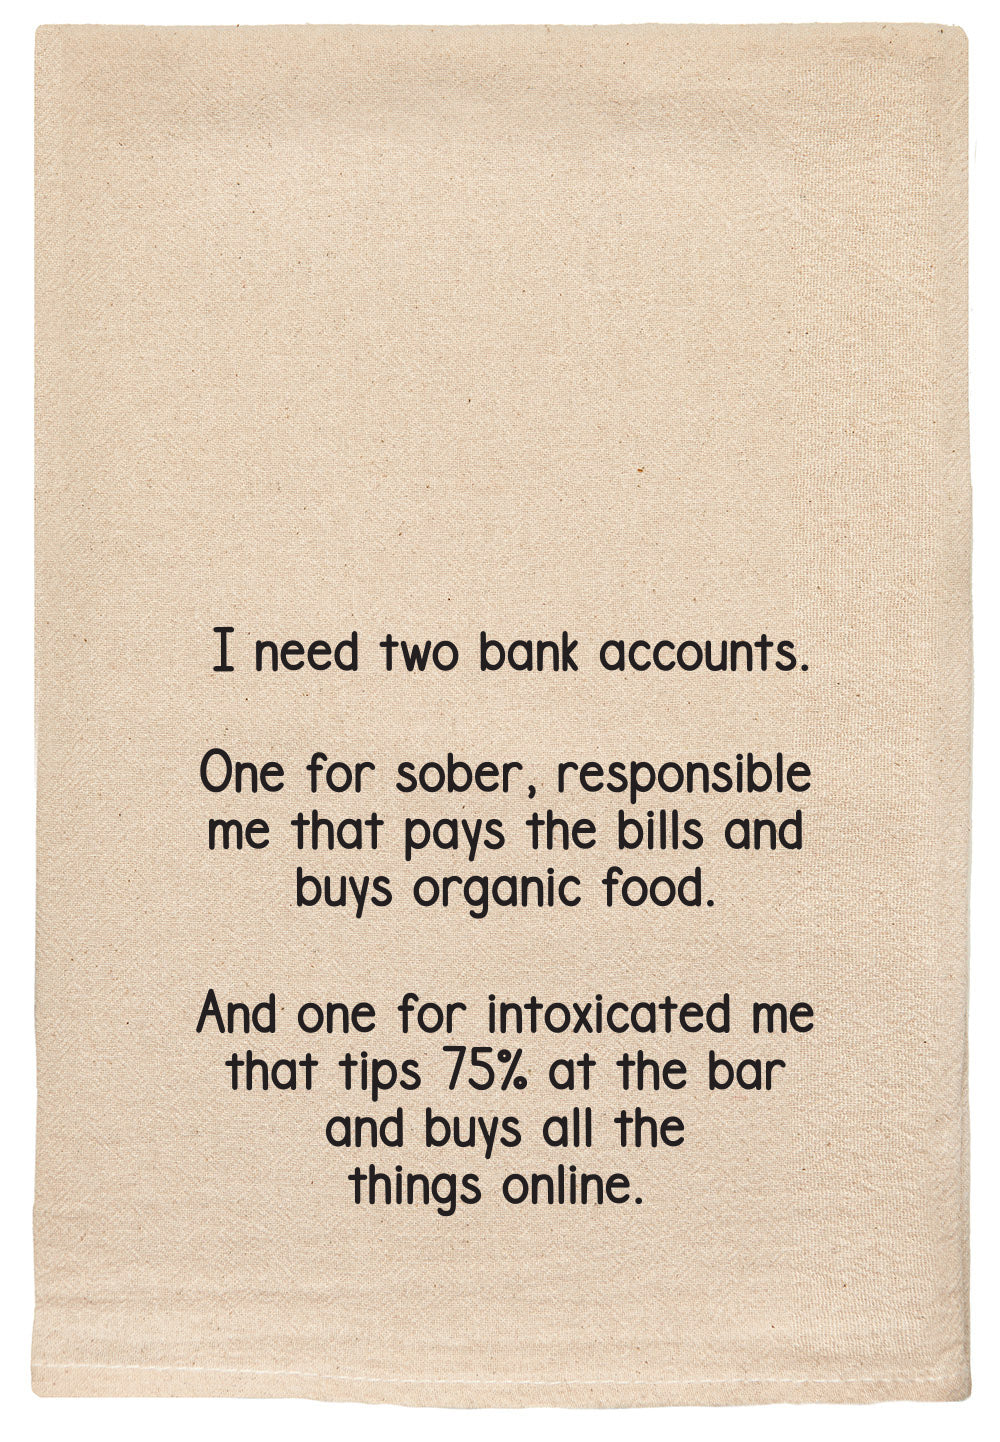 I need two bank accounts.  One for sober, responsible me that pays the bills